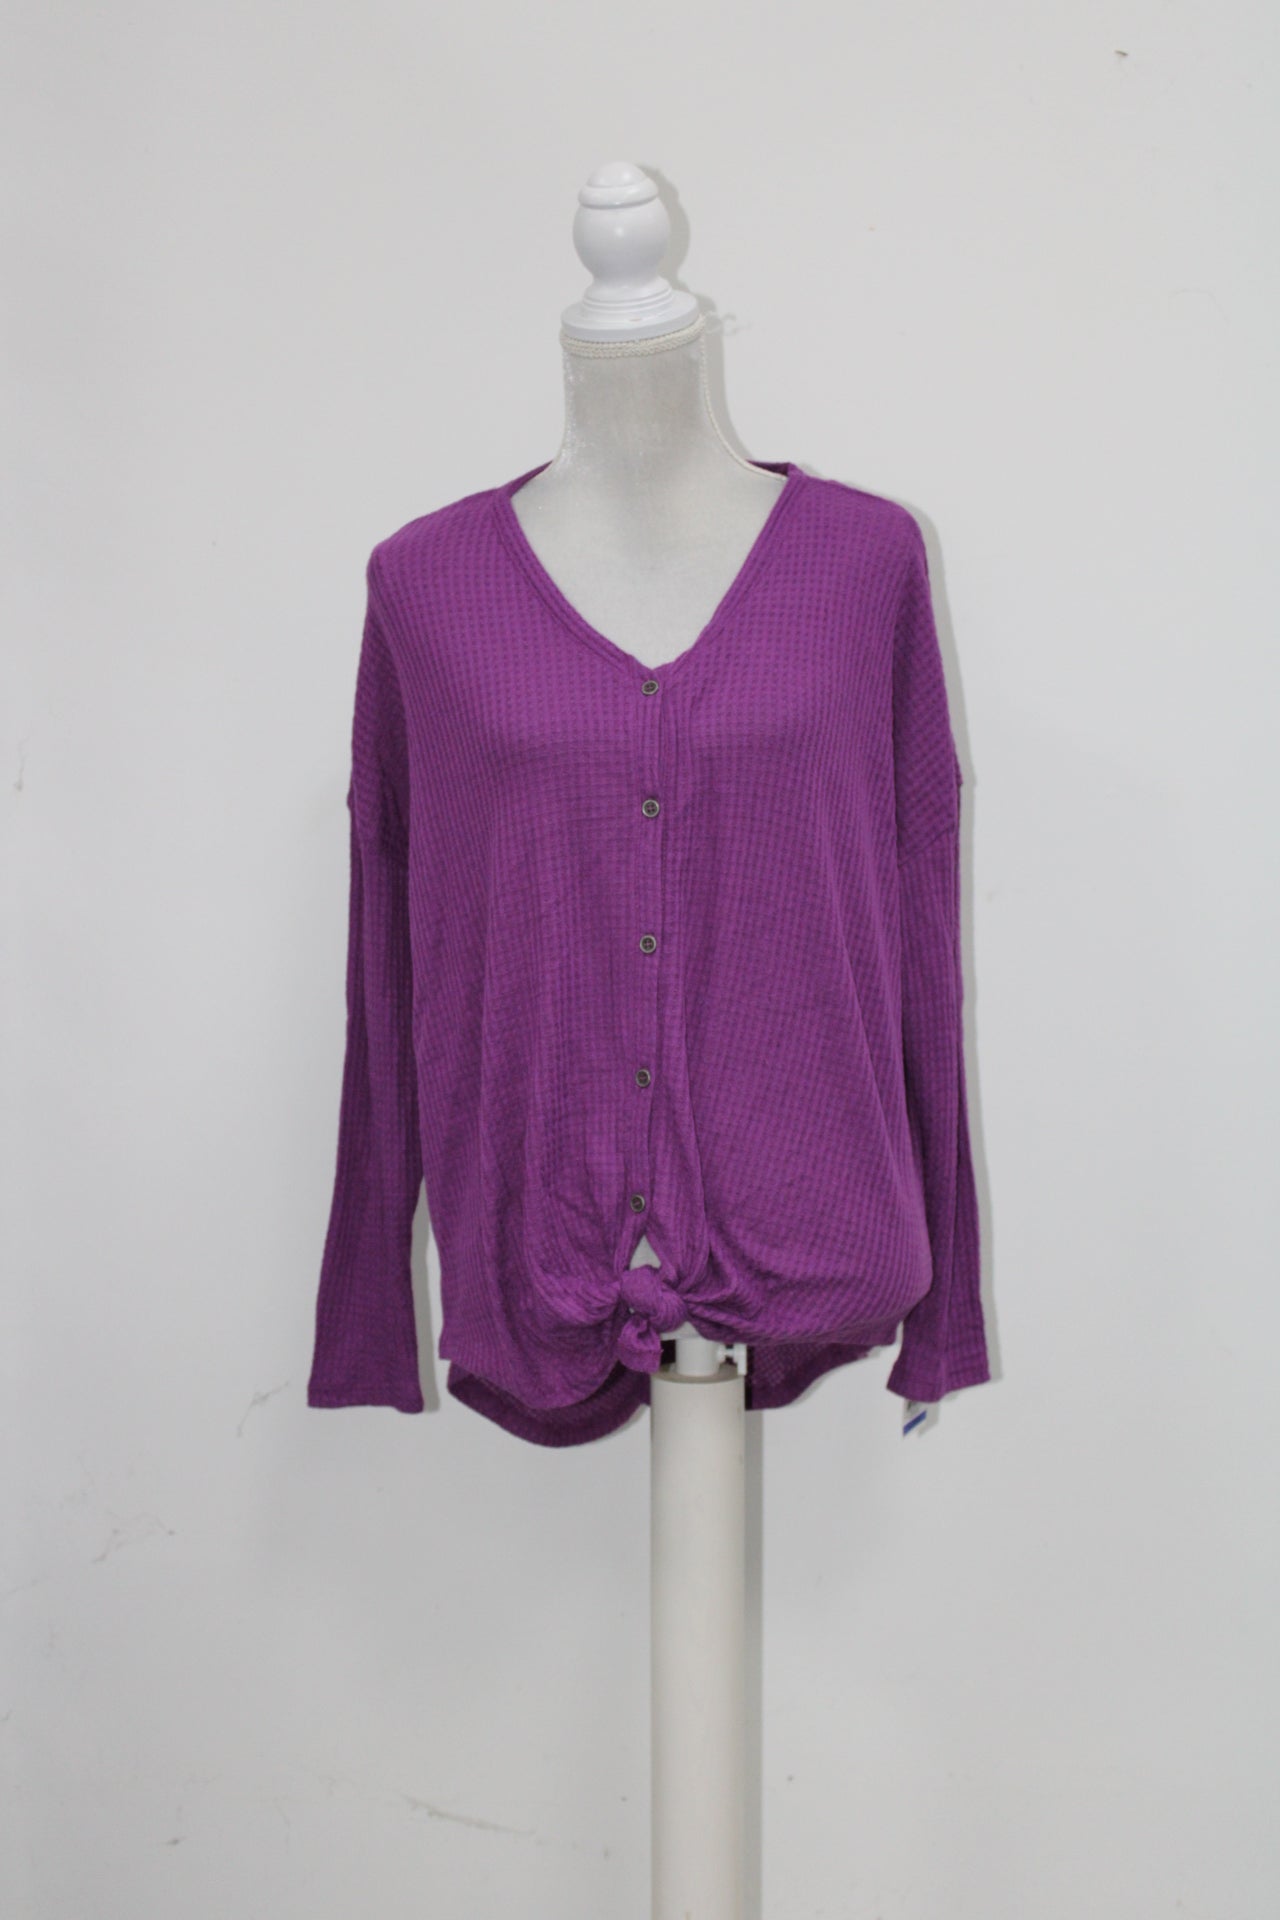 Style & Co. Thermal Button-Front Shirt (Vivid Violet, XL)